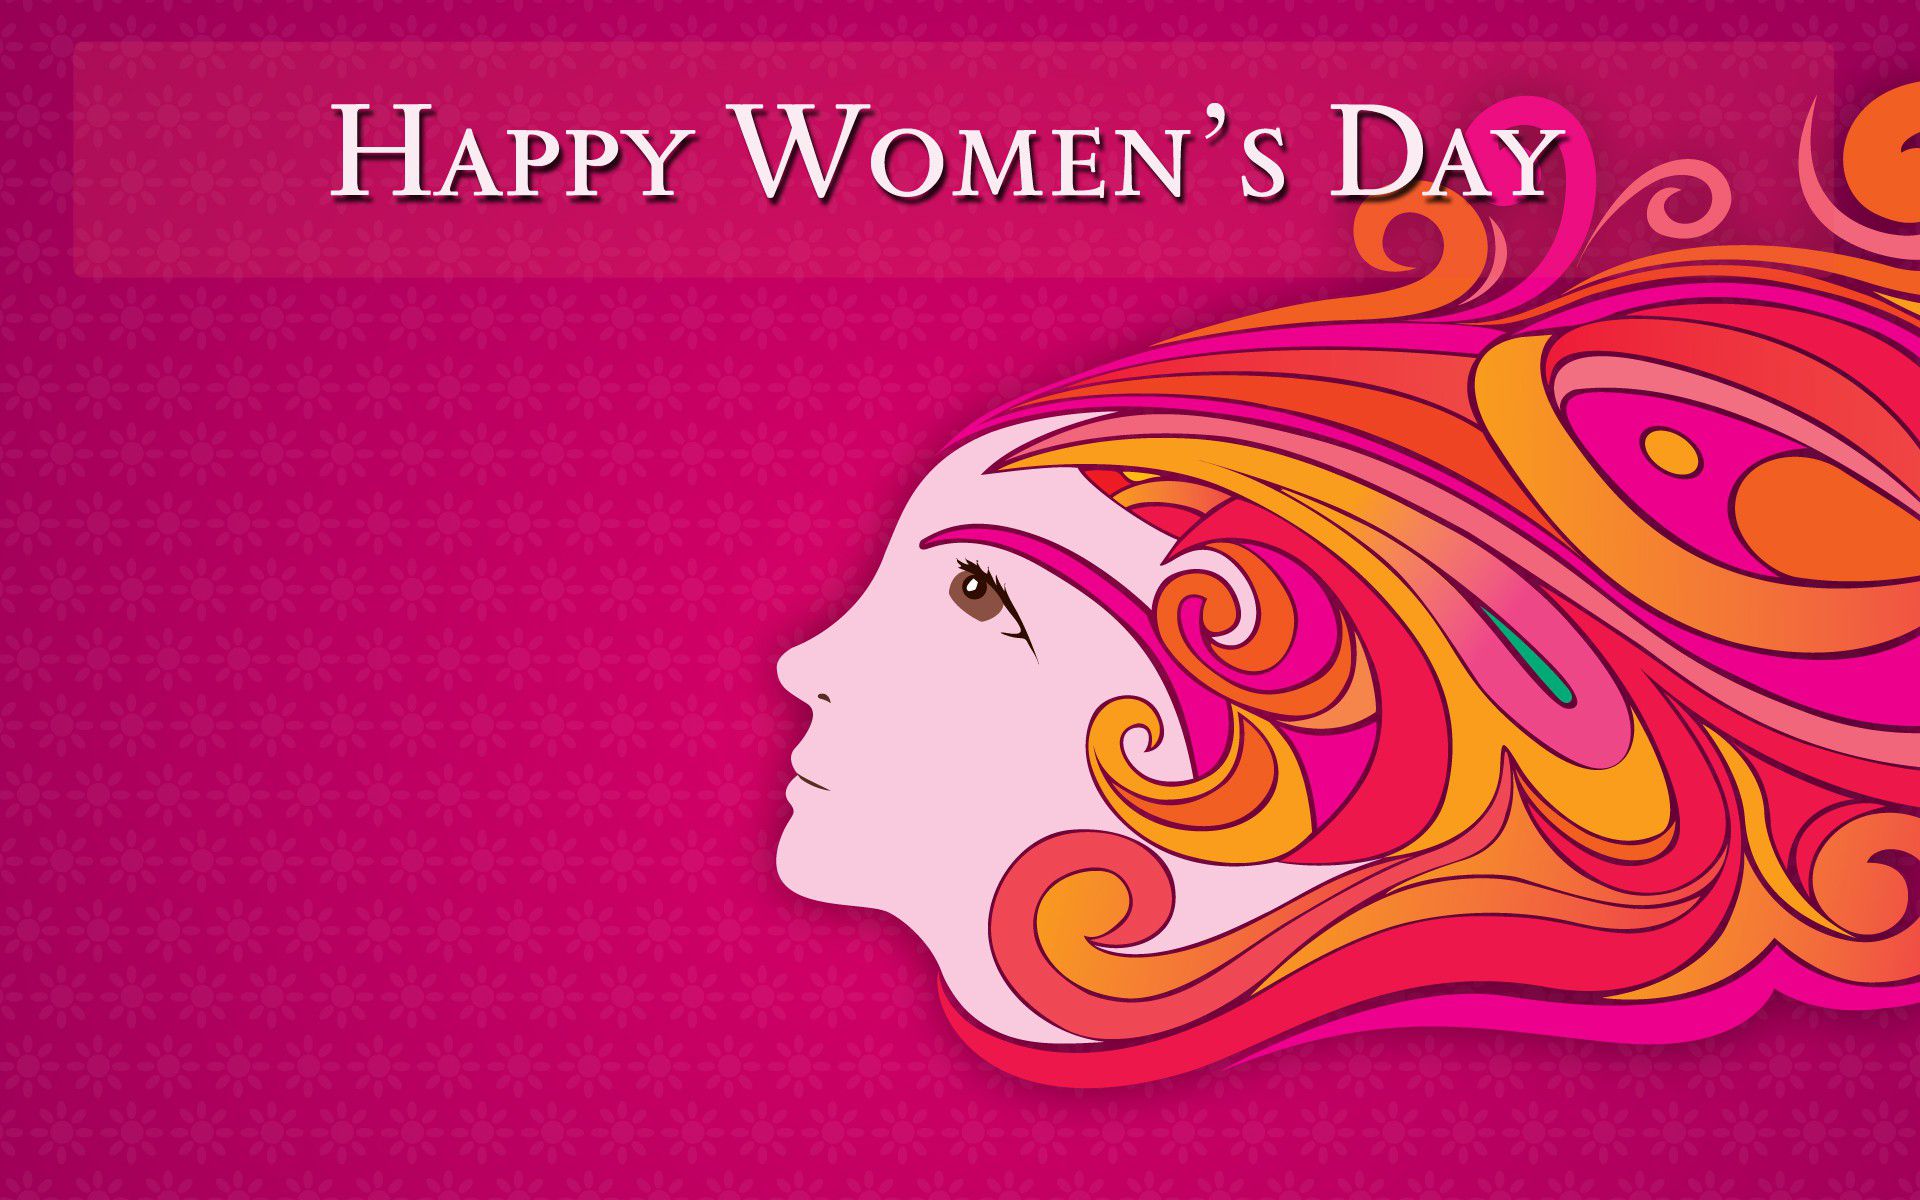 women's day hd images